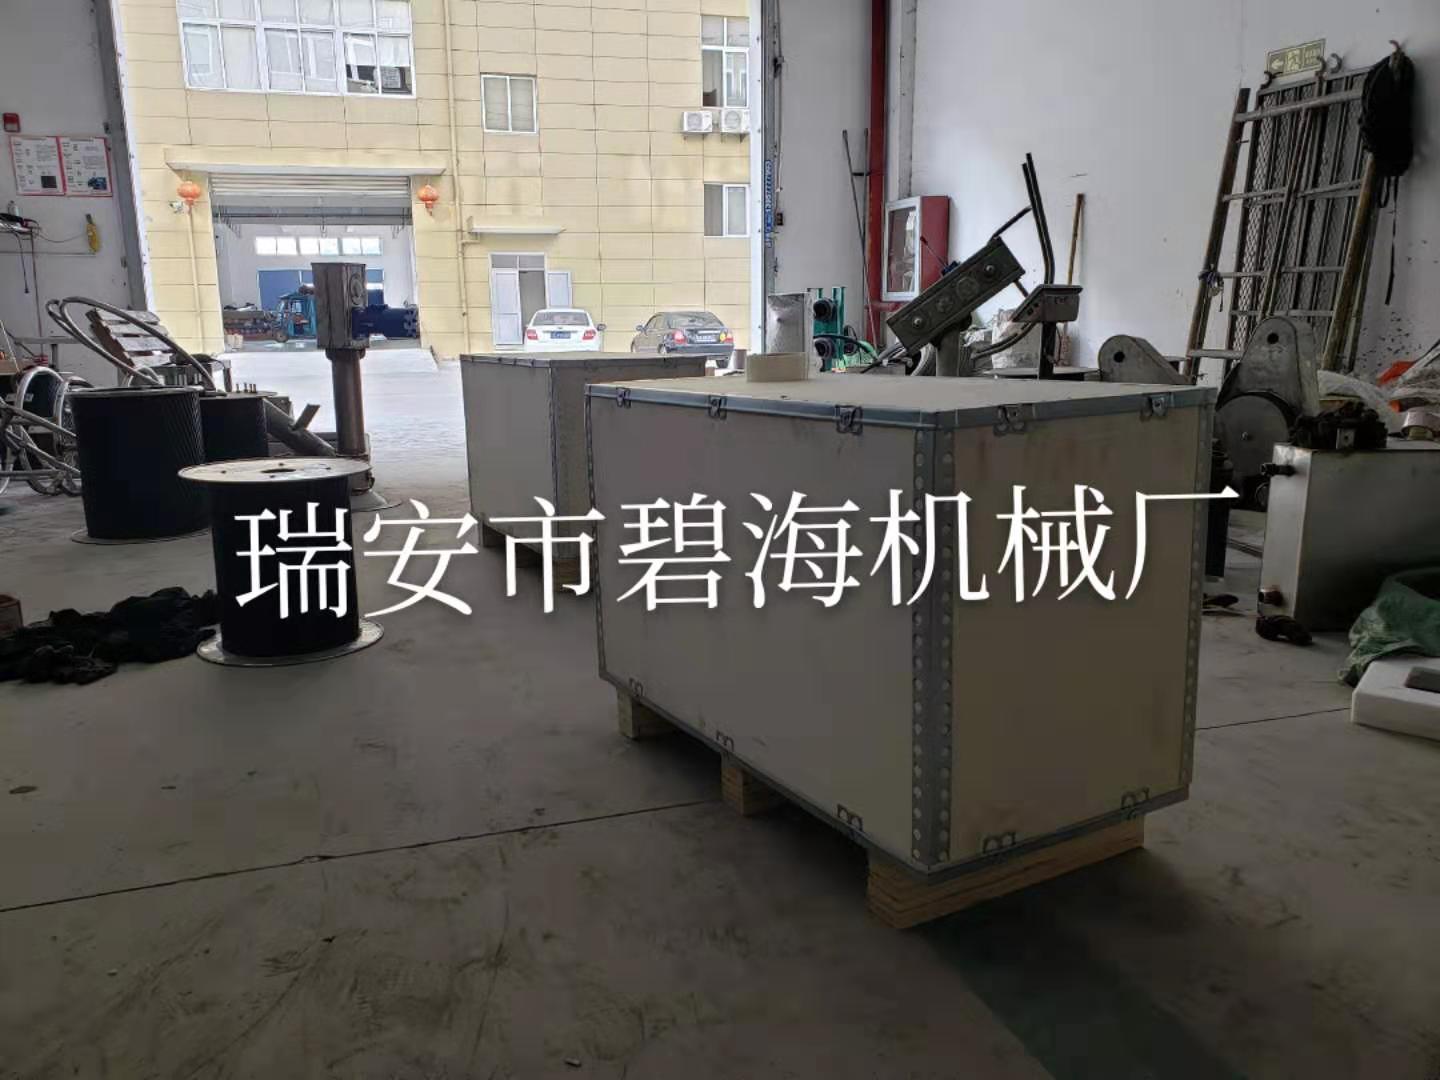   Guangdong customer hook machine delivery success